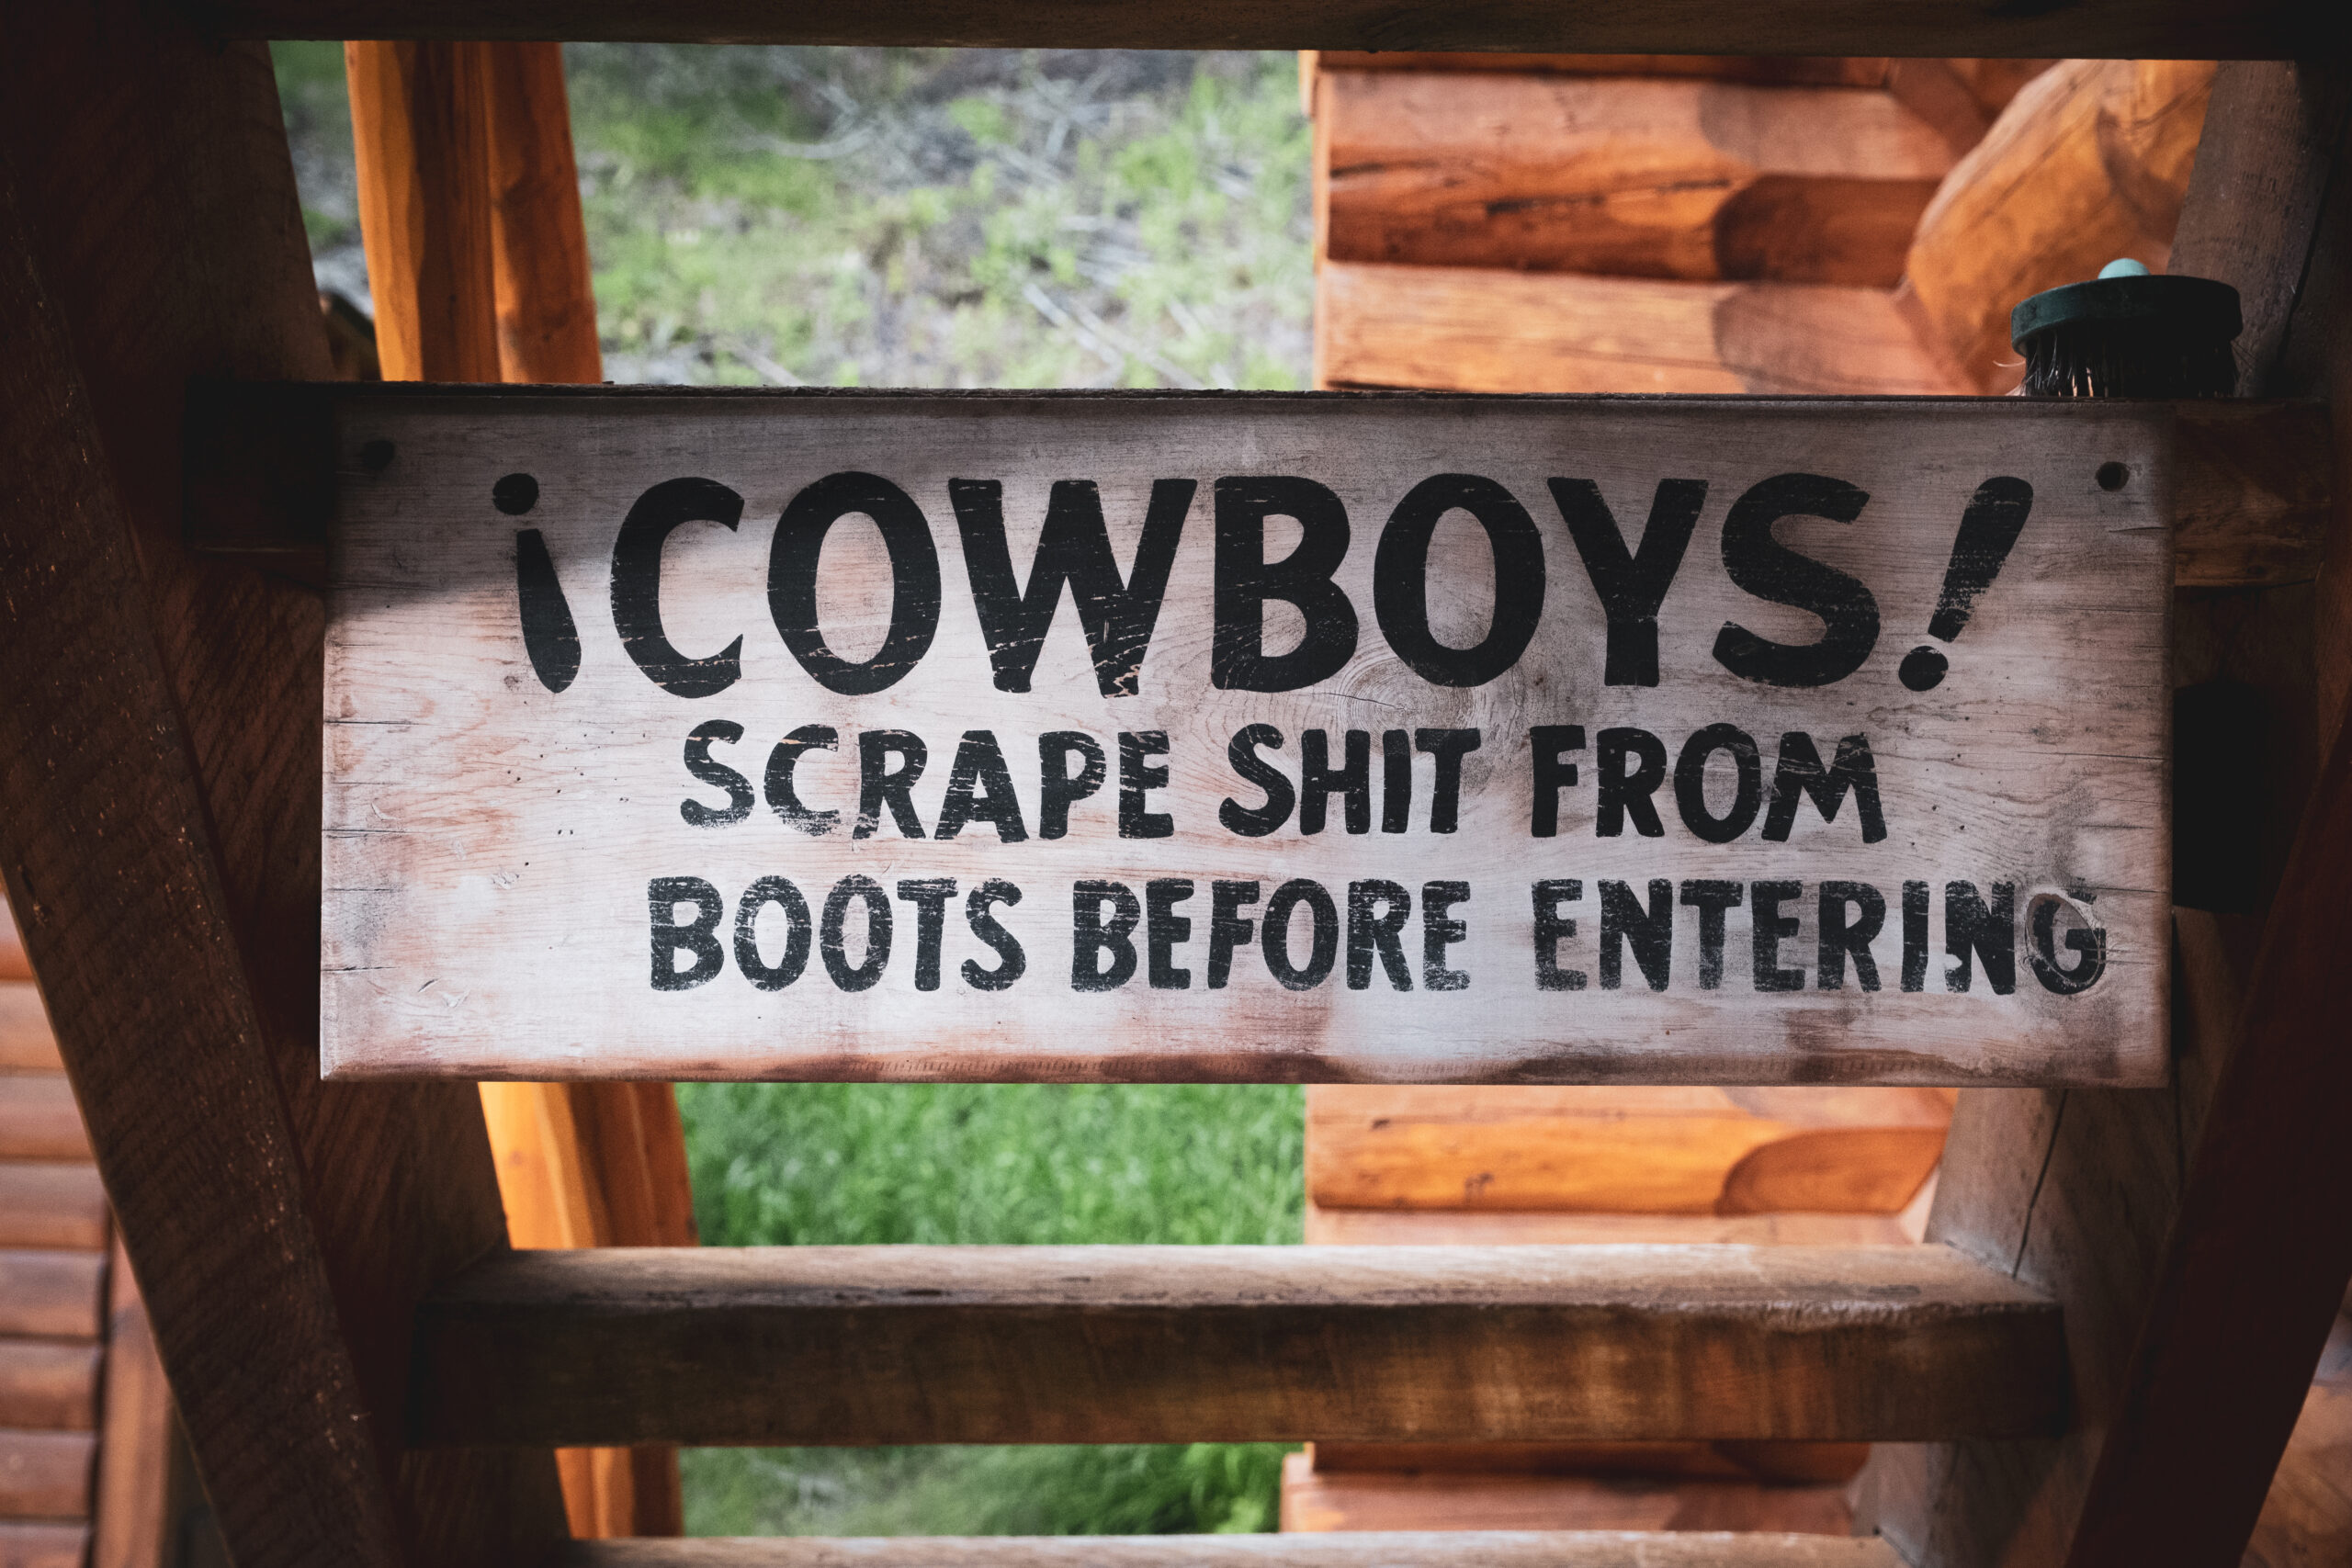 A Sign At Sundance Lodge "COWBOYS!, Scrape Shit From Boots Before Entering"